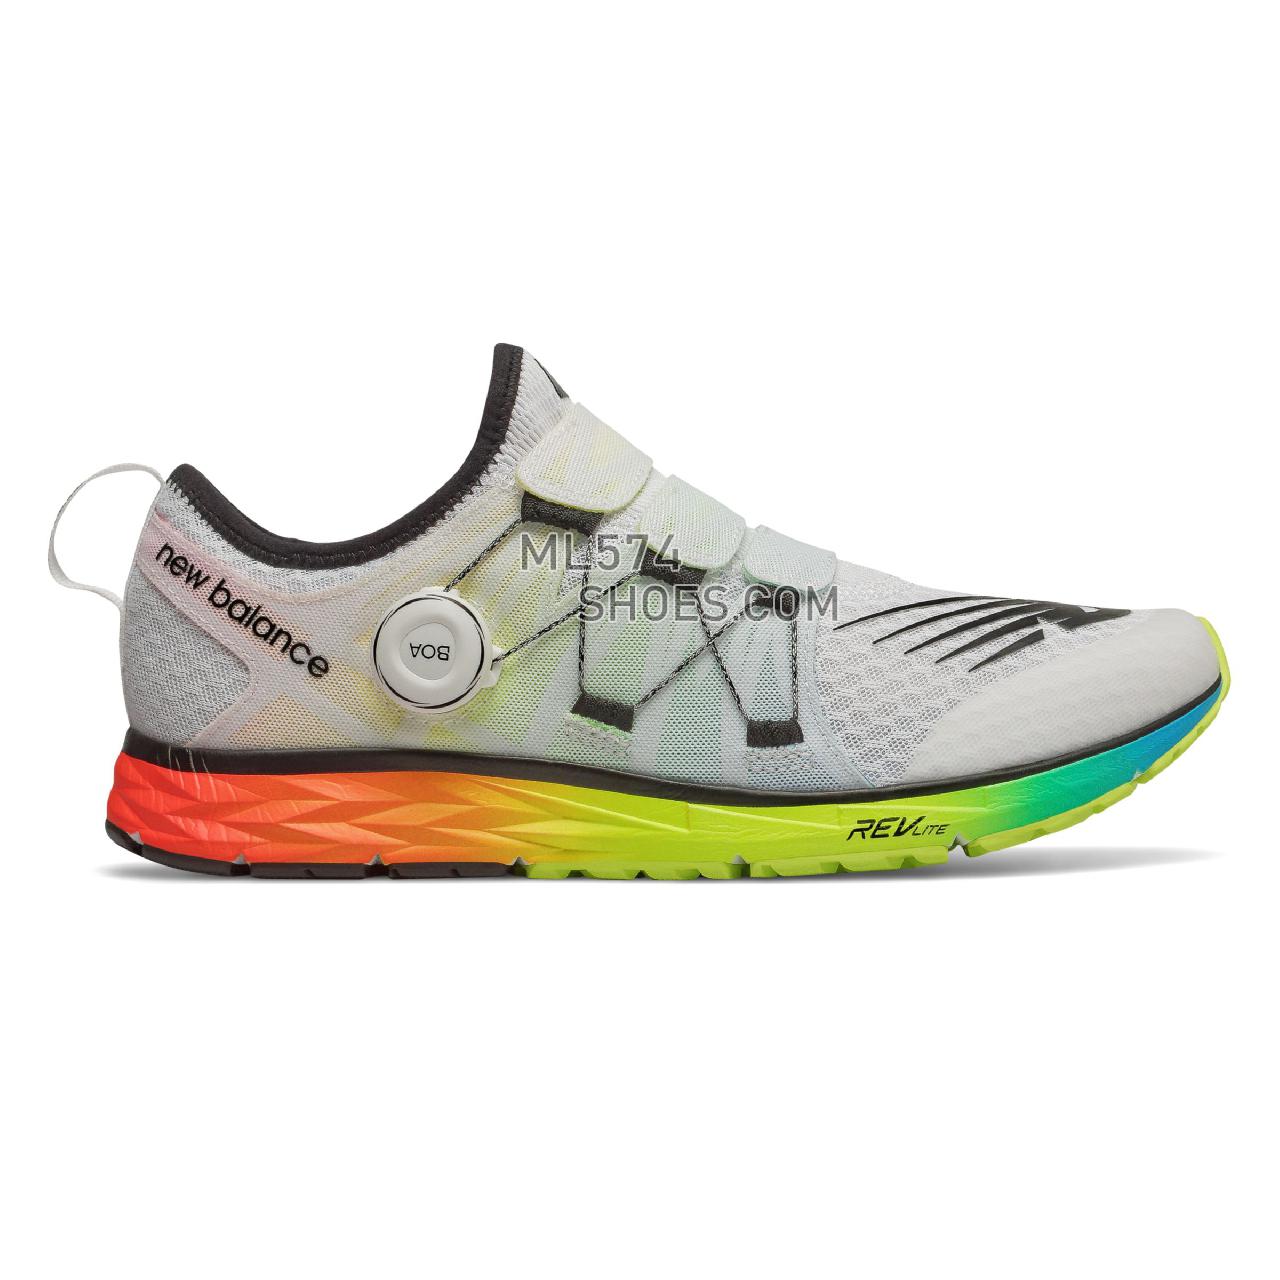 New Balance 1500T2 - Men's 1500 - Running White with Multi Color - M1500WM4